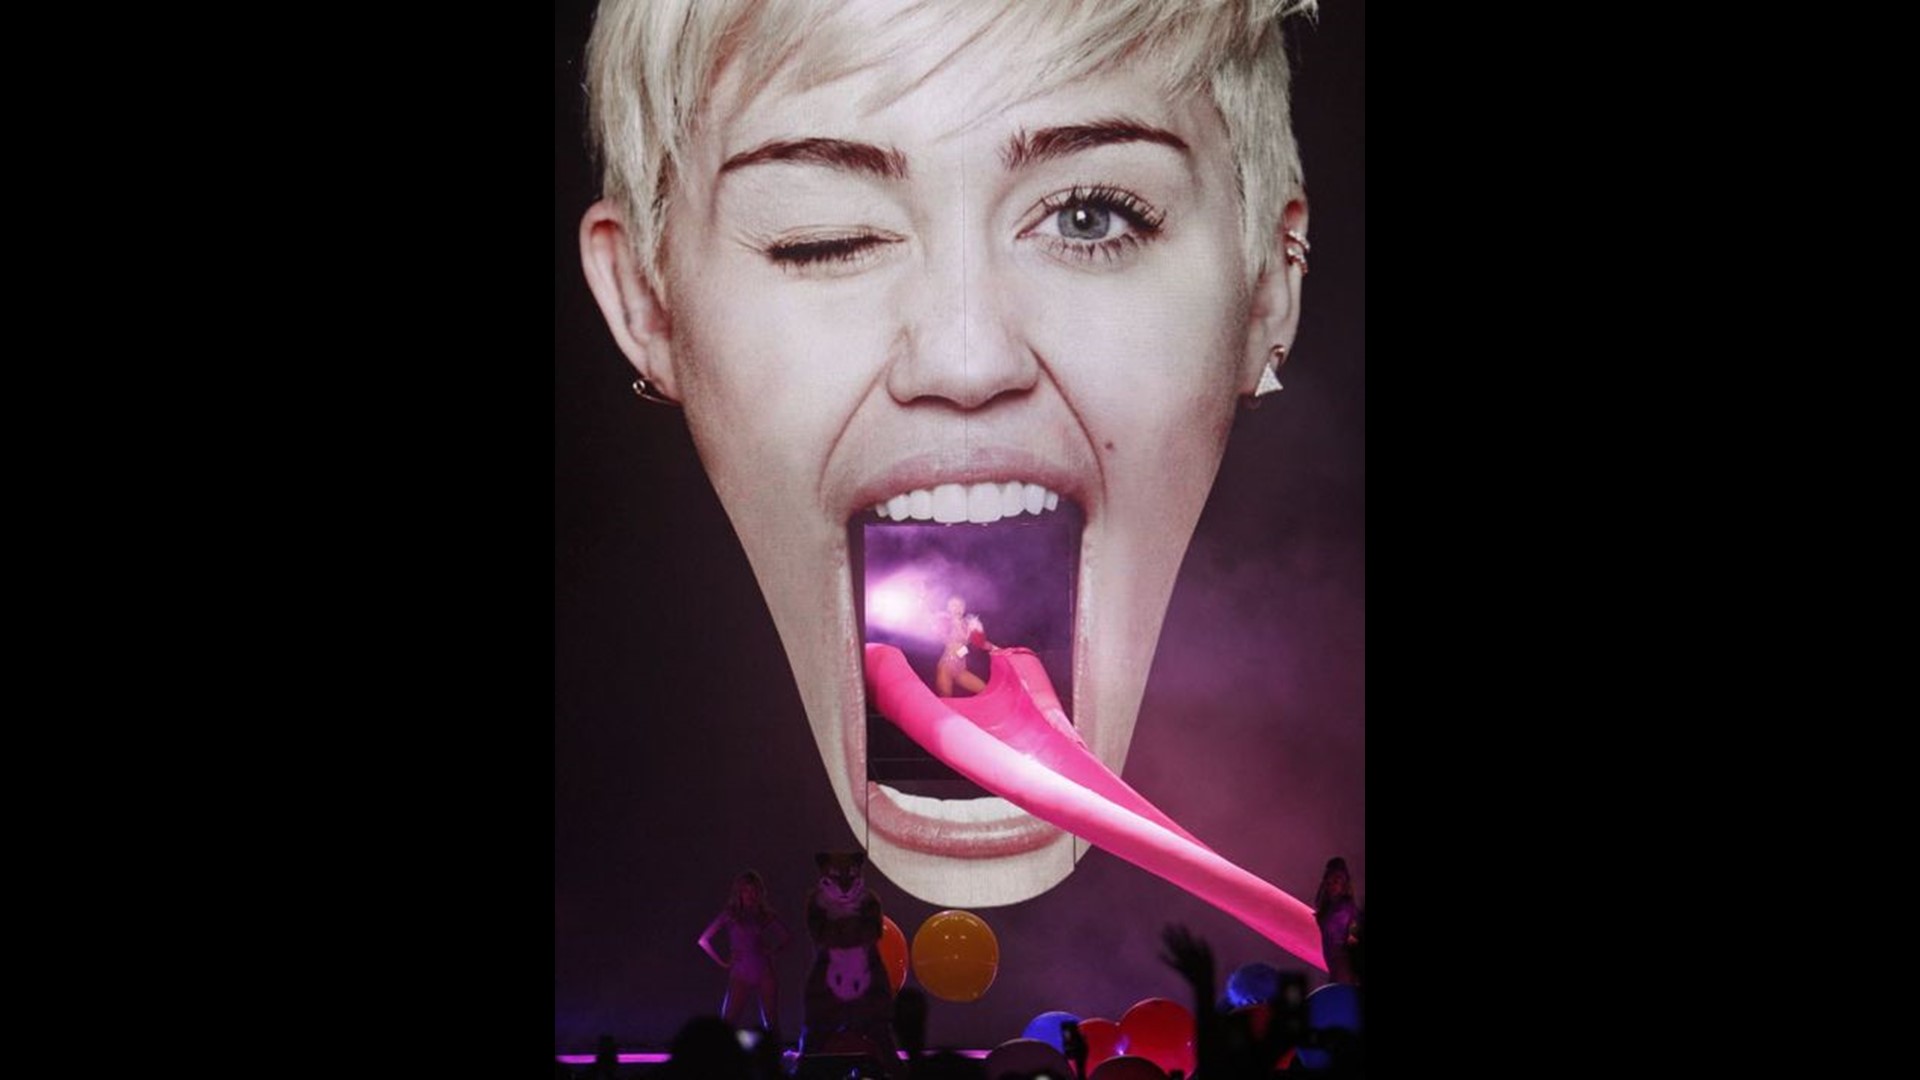 Miley Cyrus Tongue Slide Leads To Lawsuit 9968